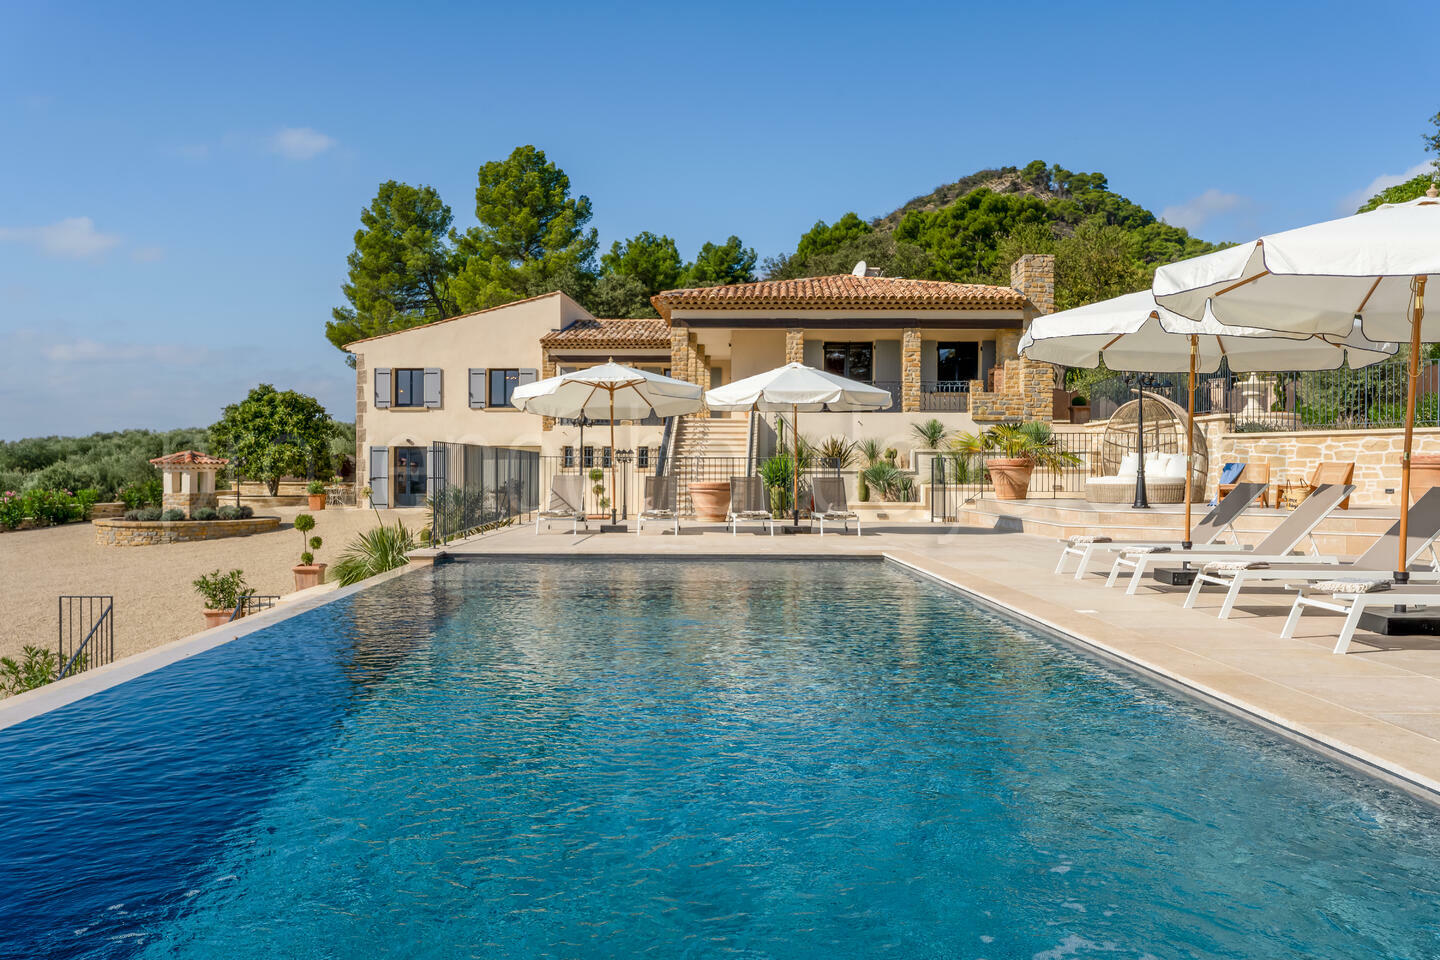 Magnificent Villa with panoramic view, heated infinity pool and spa baths 1 - Villa des Estrets: Villa: Pool